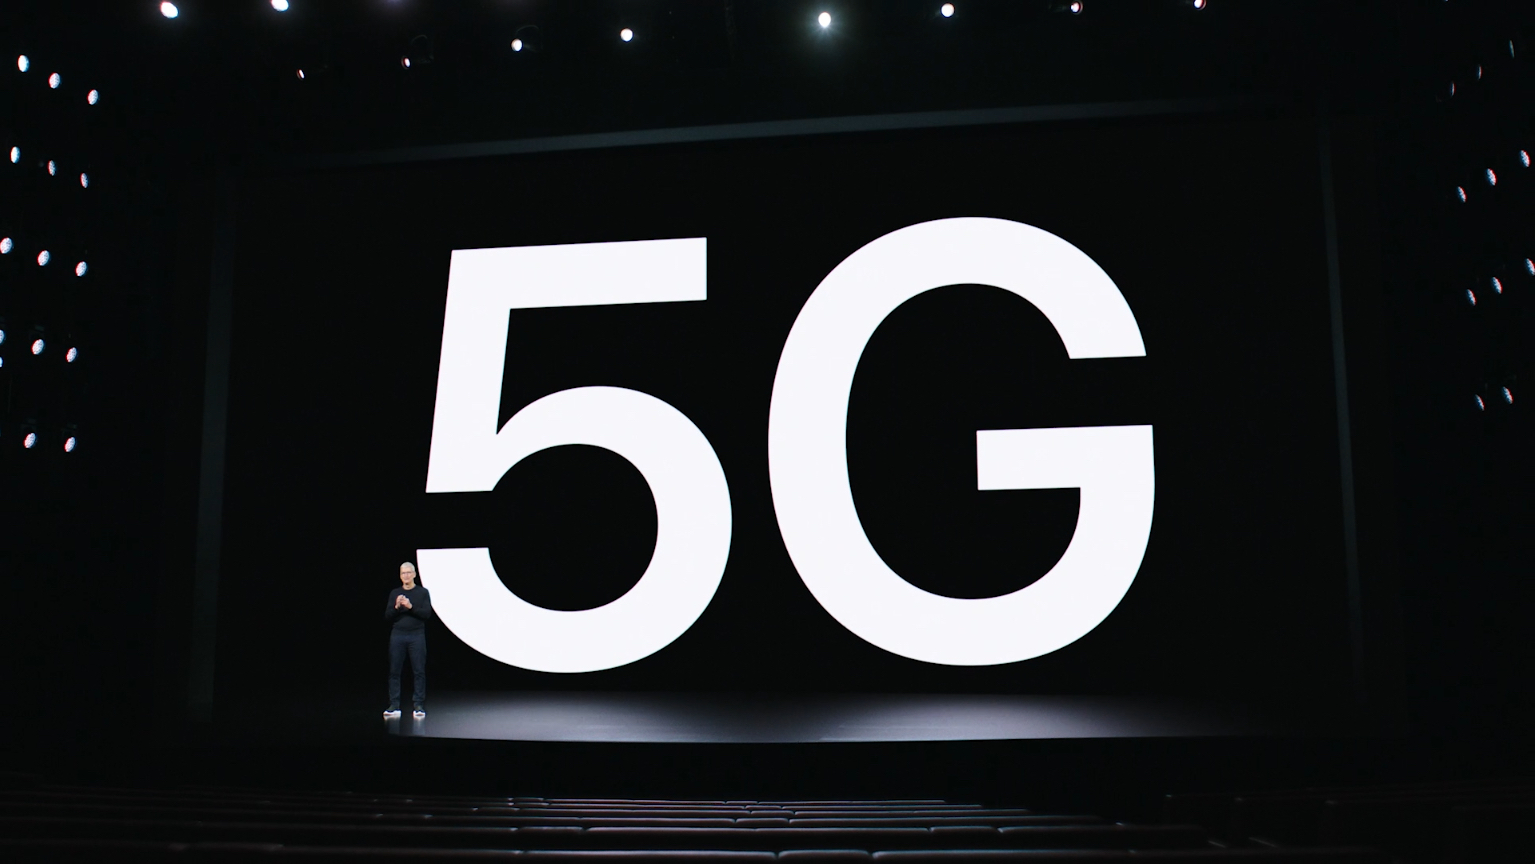 What are the benefits of 5G? Better coverage, speed, and more